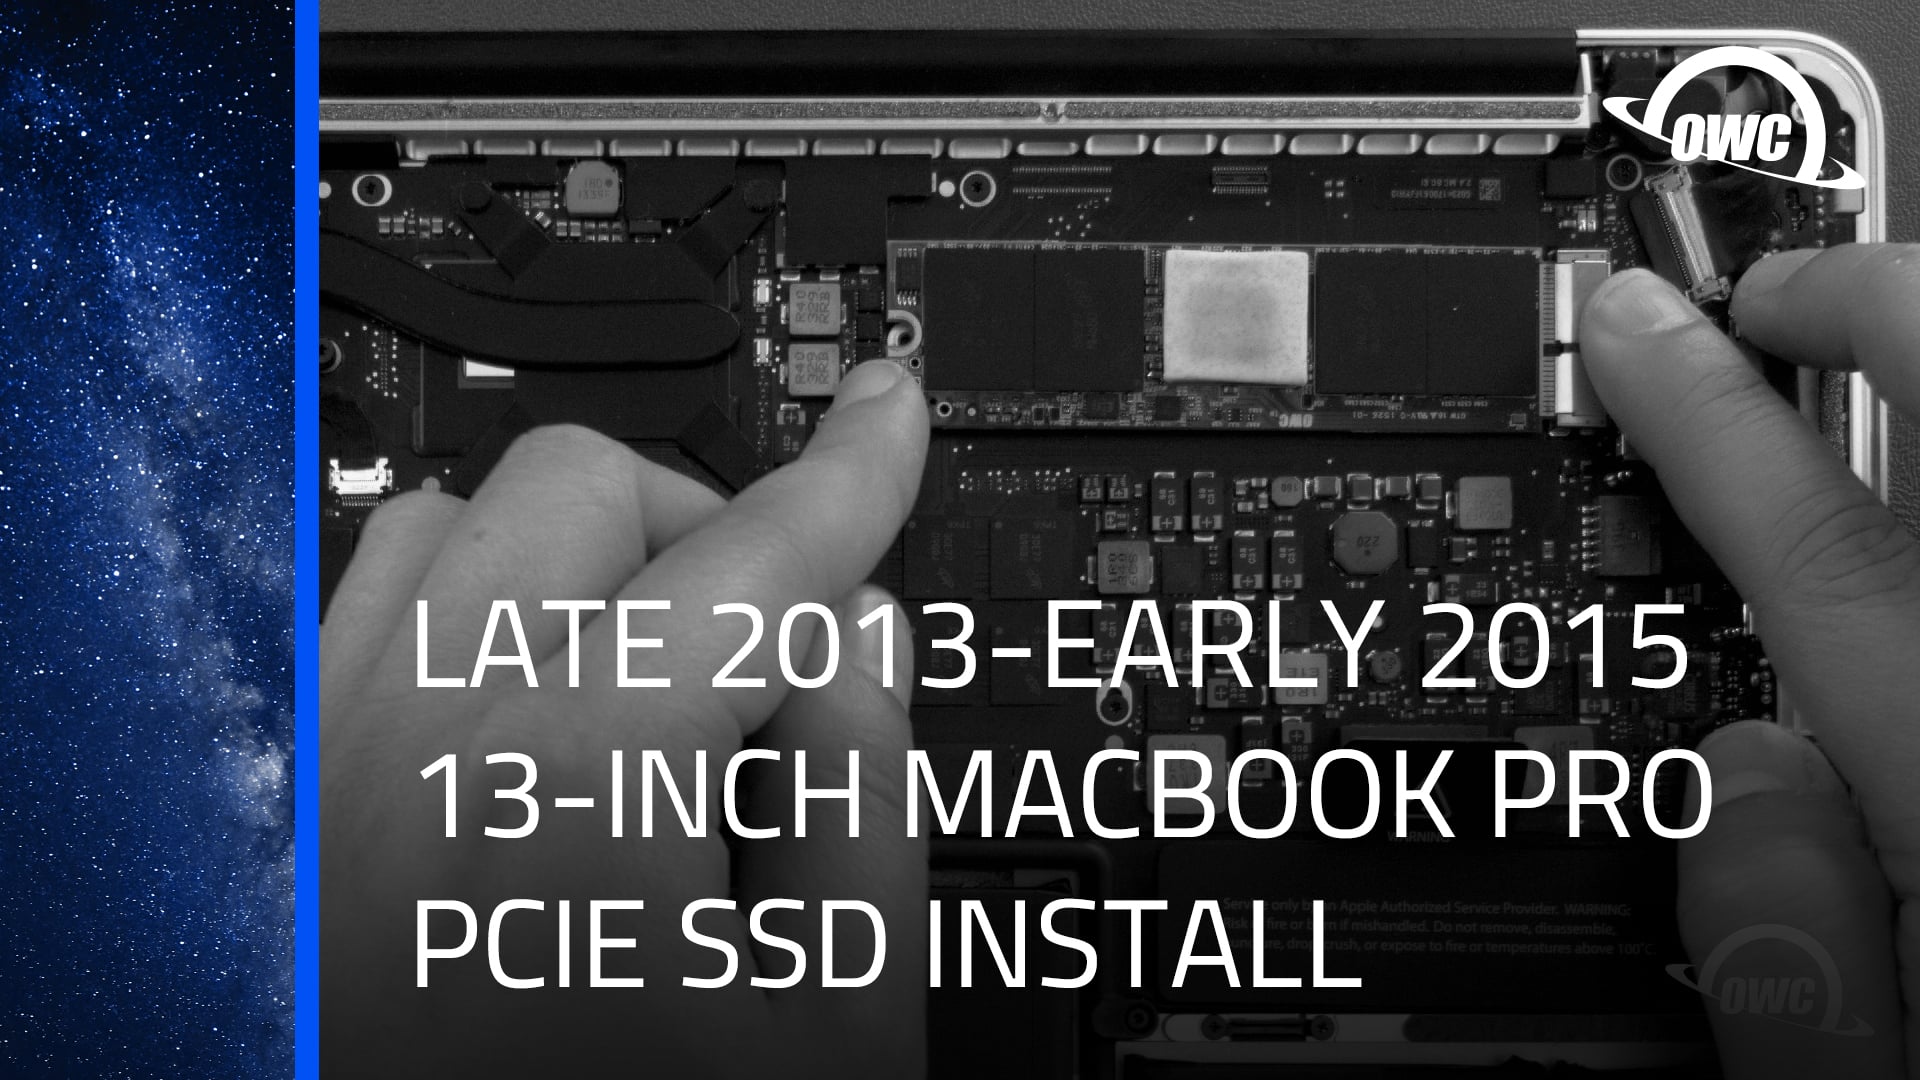 How Upgrade the SSD in a 13-inch MacBook w/ Retina display (Late 2013 - Early 2015) on Vimeo